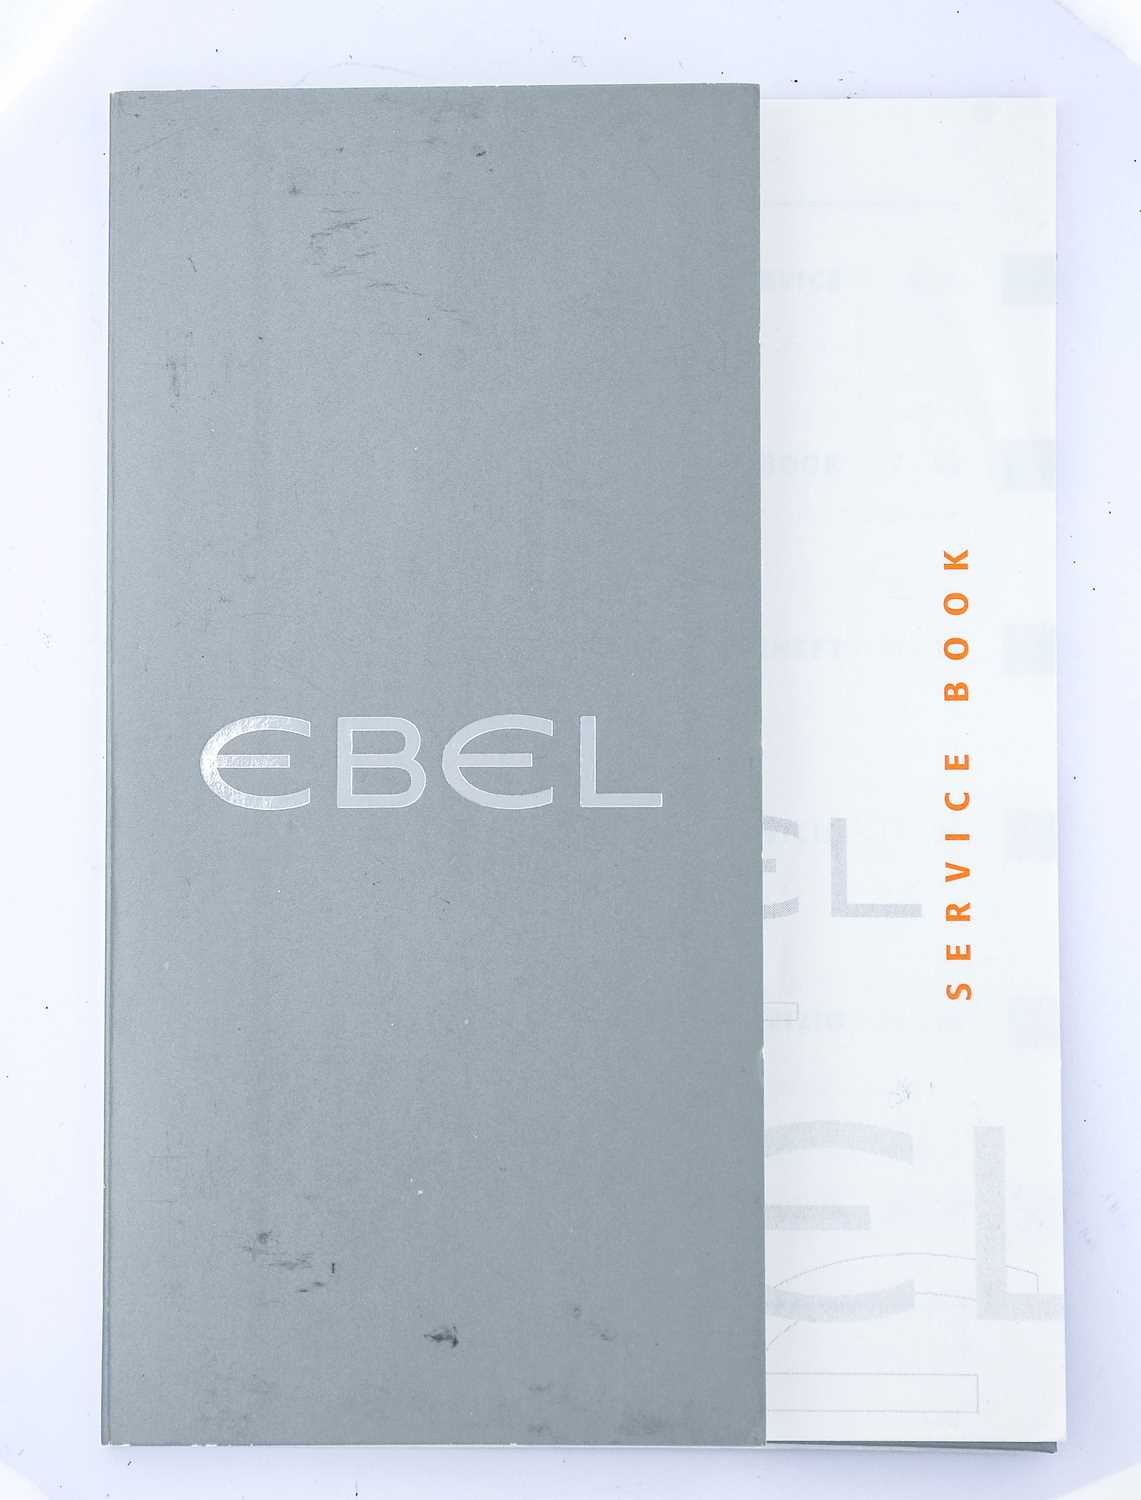 Ebel: A Stainless Steel Calendar Centre Seconds Wristwatch, signed Ebel, model: Classic Wave, ref: - Image 2 of 12